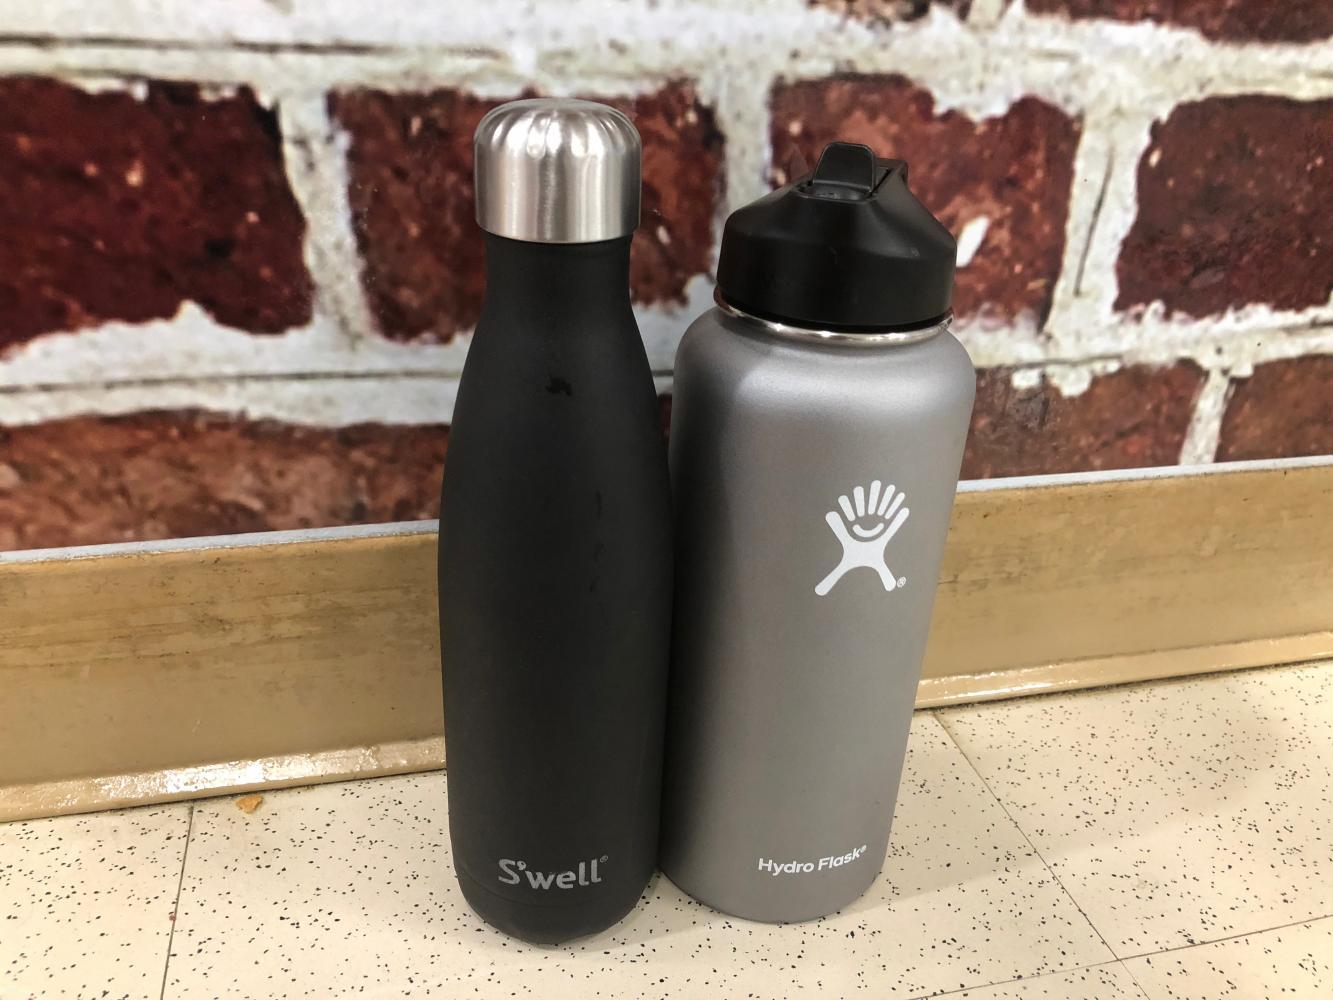 Hydro Flask vs. S'well: which bottle is 